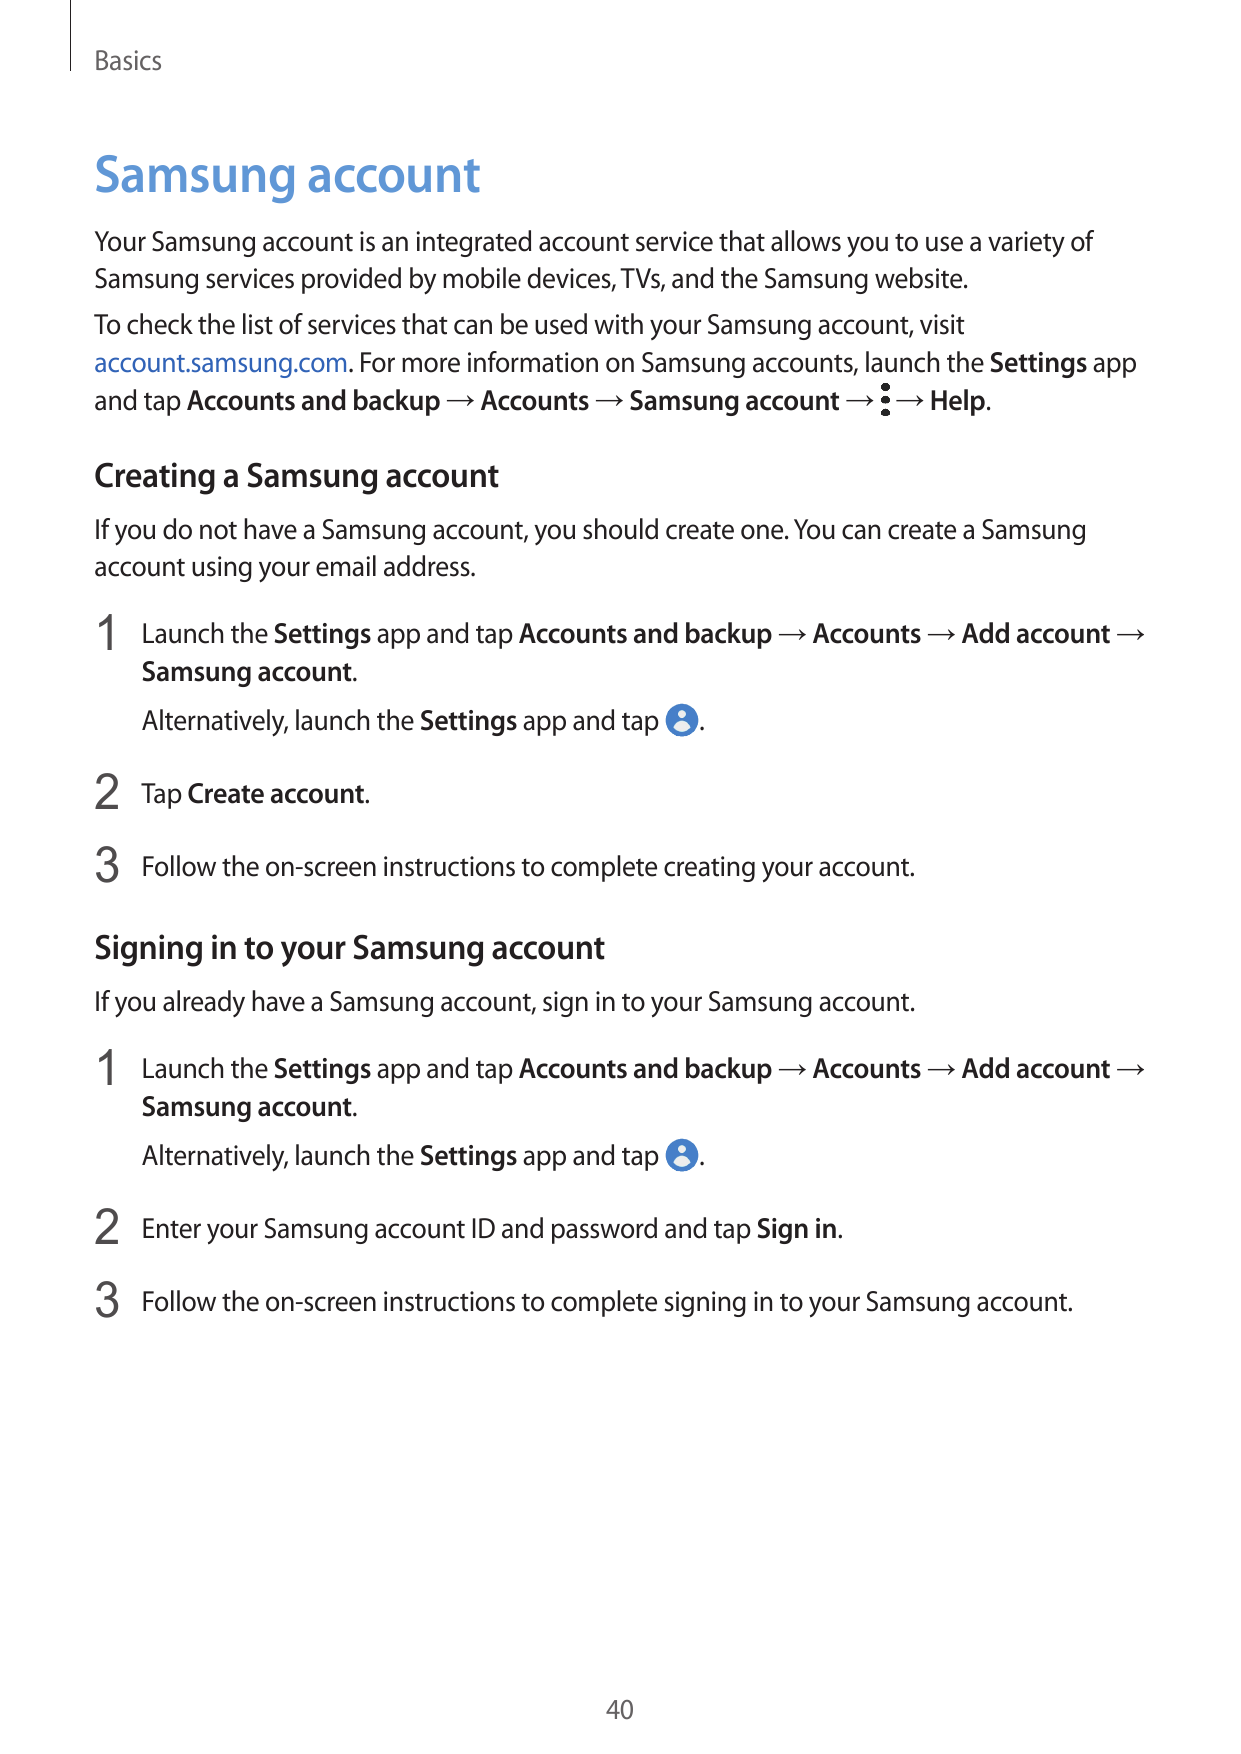 BasicsSamsung accountYour Samsung account is an integrated account service that allows you to use a variety ofSamsung services p